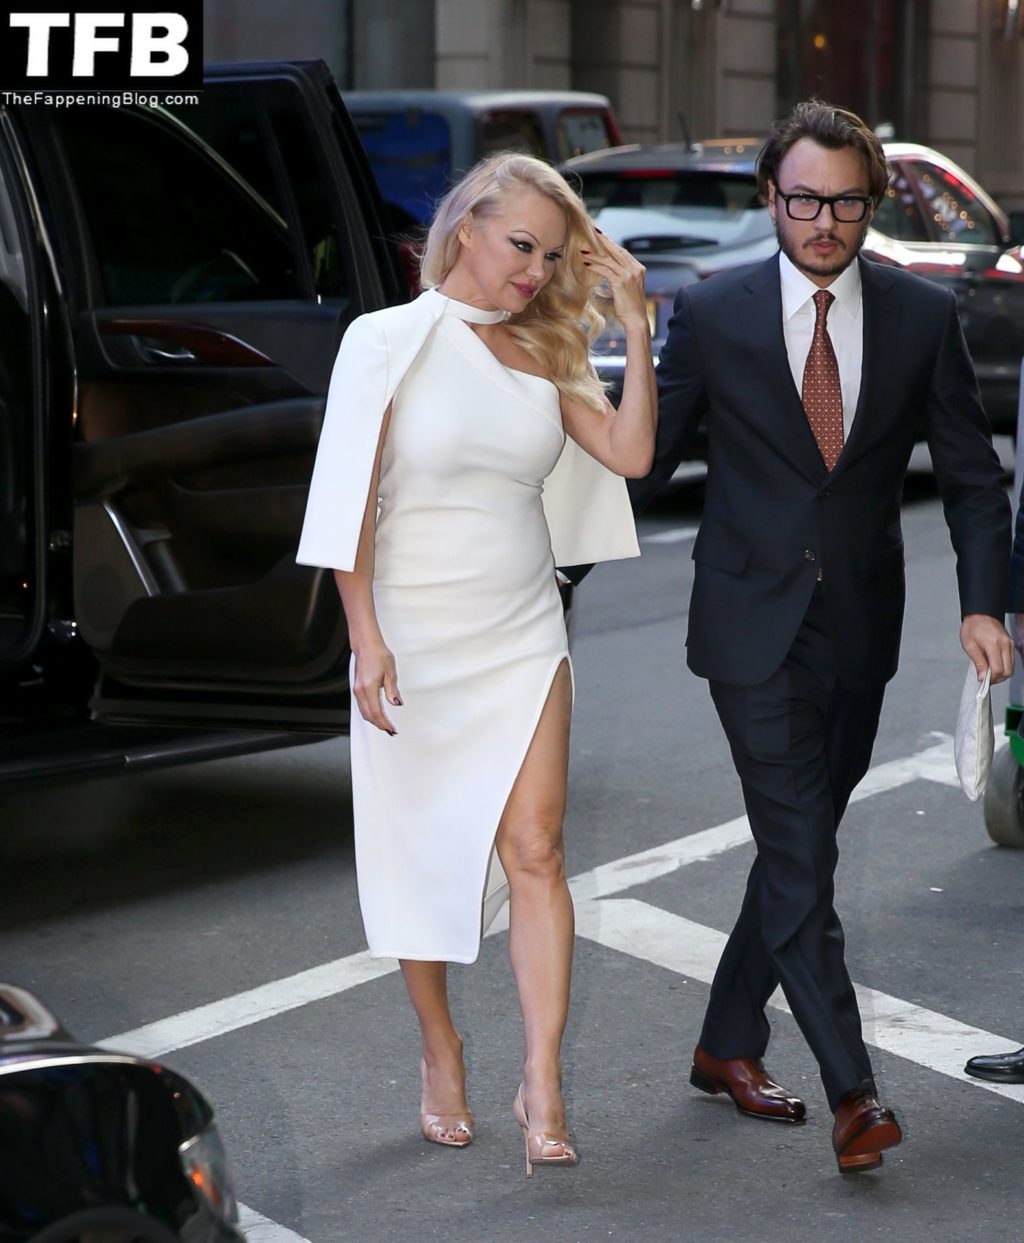 Pamela Anderson Sexy The Fappening Blog 43 1024x1243 - Pamela Anderson Heads to Good Morning America (107 Photos + Video)